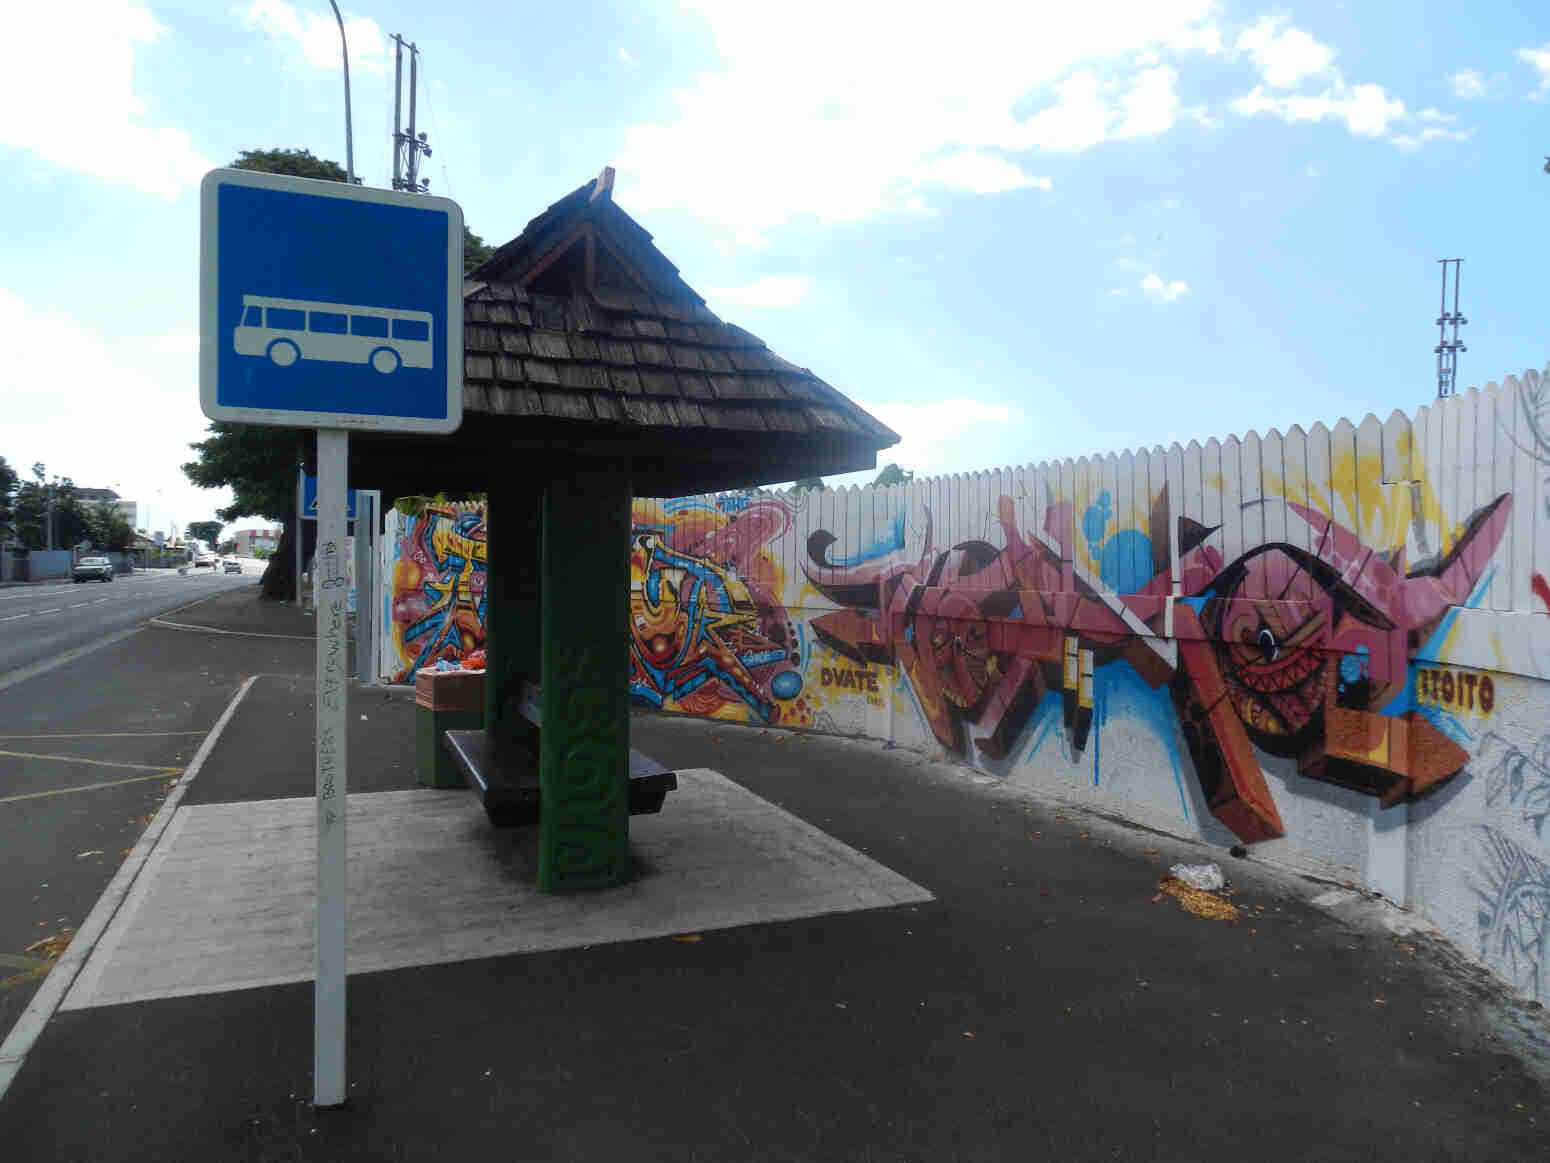 Bus stop in Papeete